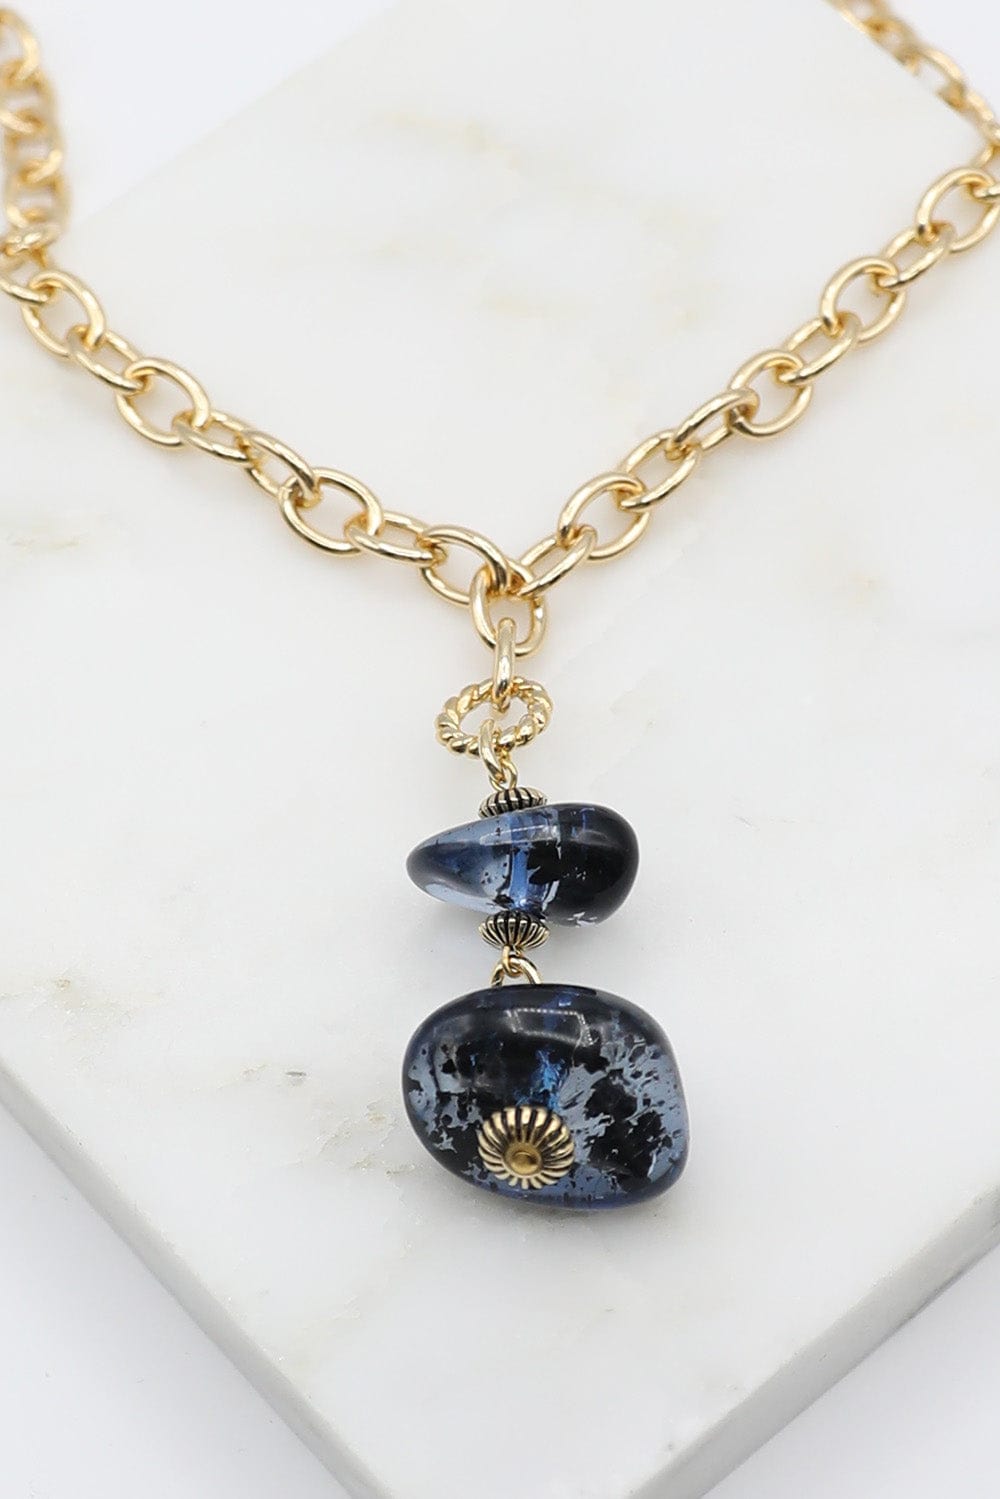 Necklace with Two Ocean Blue Resin Beads on Gold Chain